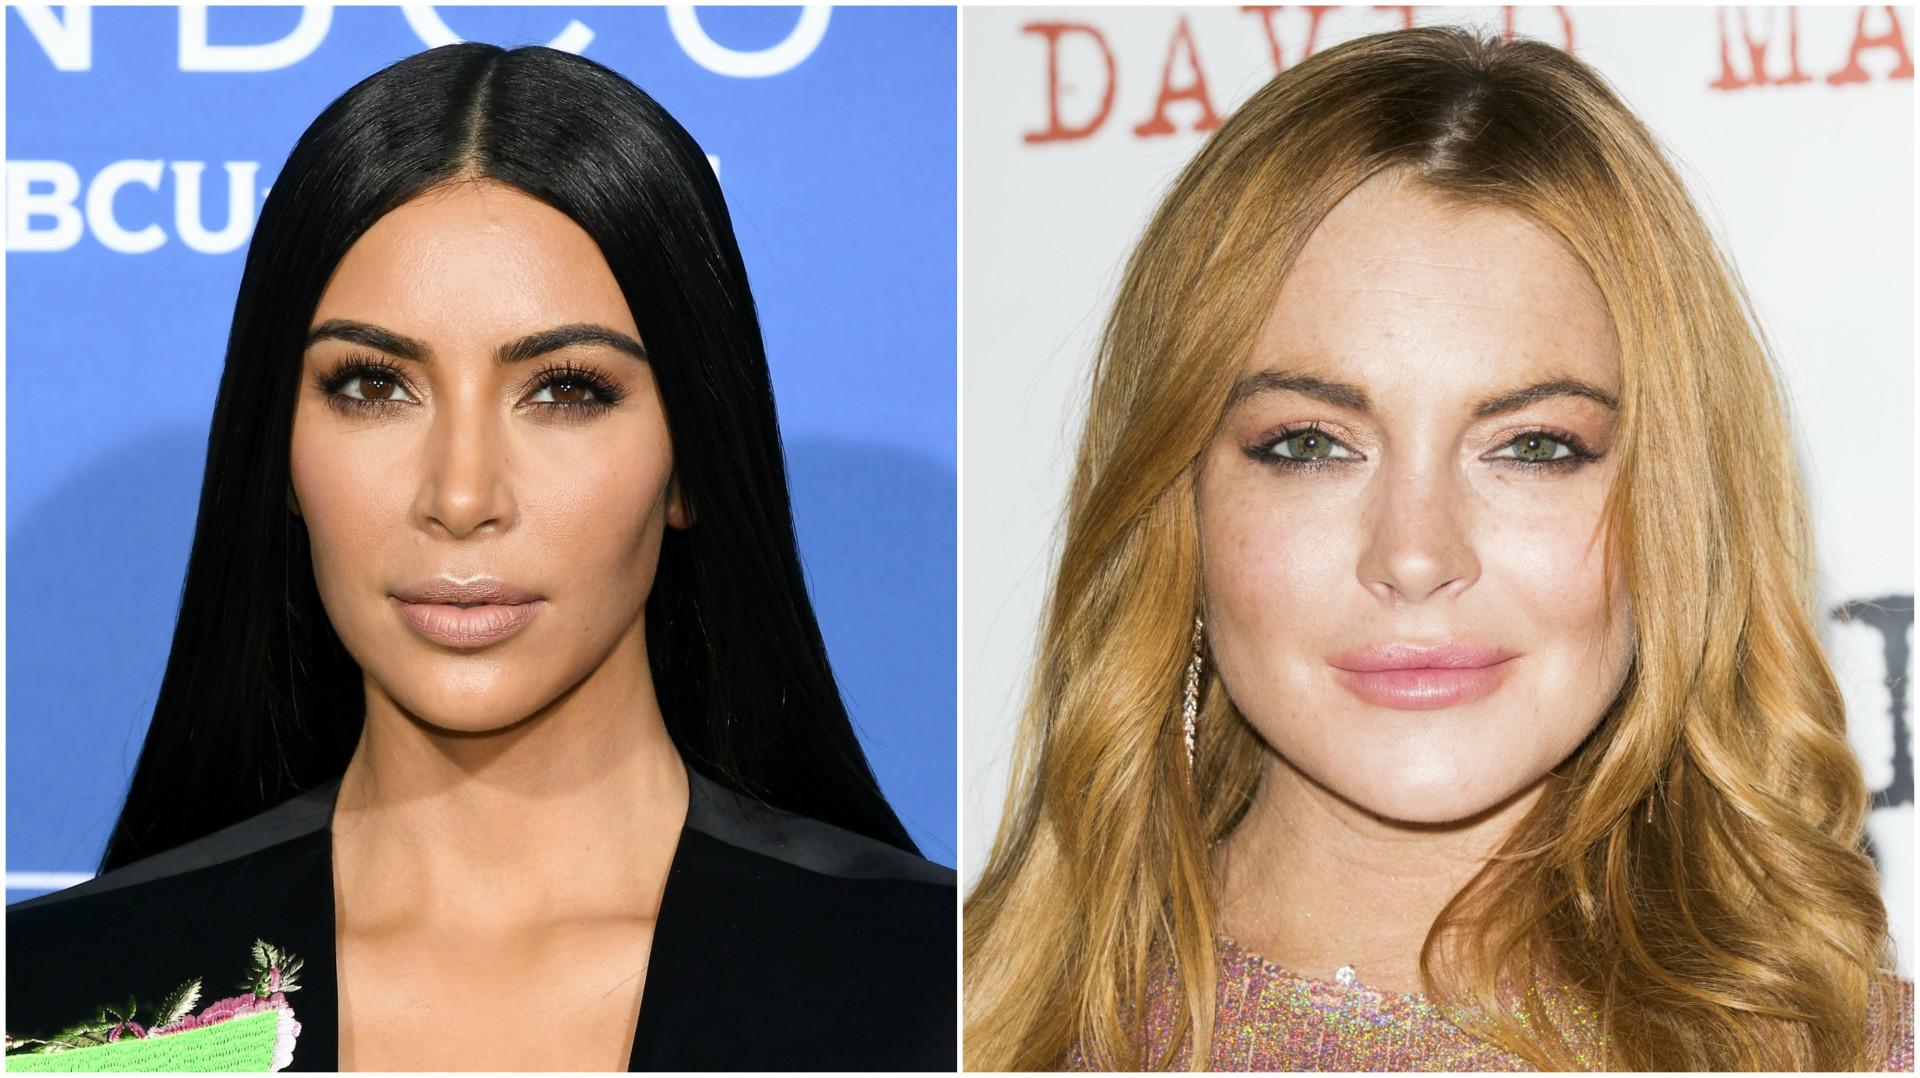 <p>Kim Kardashian occasionally chooses to style her hair in braids. However, this decision has sparked critiques, including from actress Lindsay Lohan, who accused Kardashian of cultural appropriation. </p><p>You may also like:<a href="https://www.starsinsider.com/n/496758?utm_source=msn.com&utm_medium=display&utm_campaign=referral_description&utm_content=570915en-en"> Actors with old-age makeup vs how they actually looked at the same age</a></p>